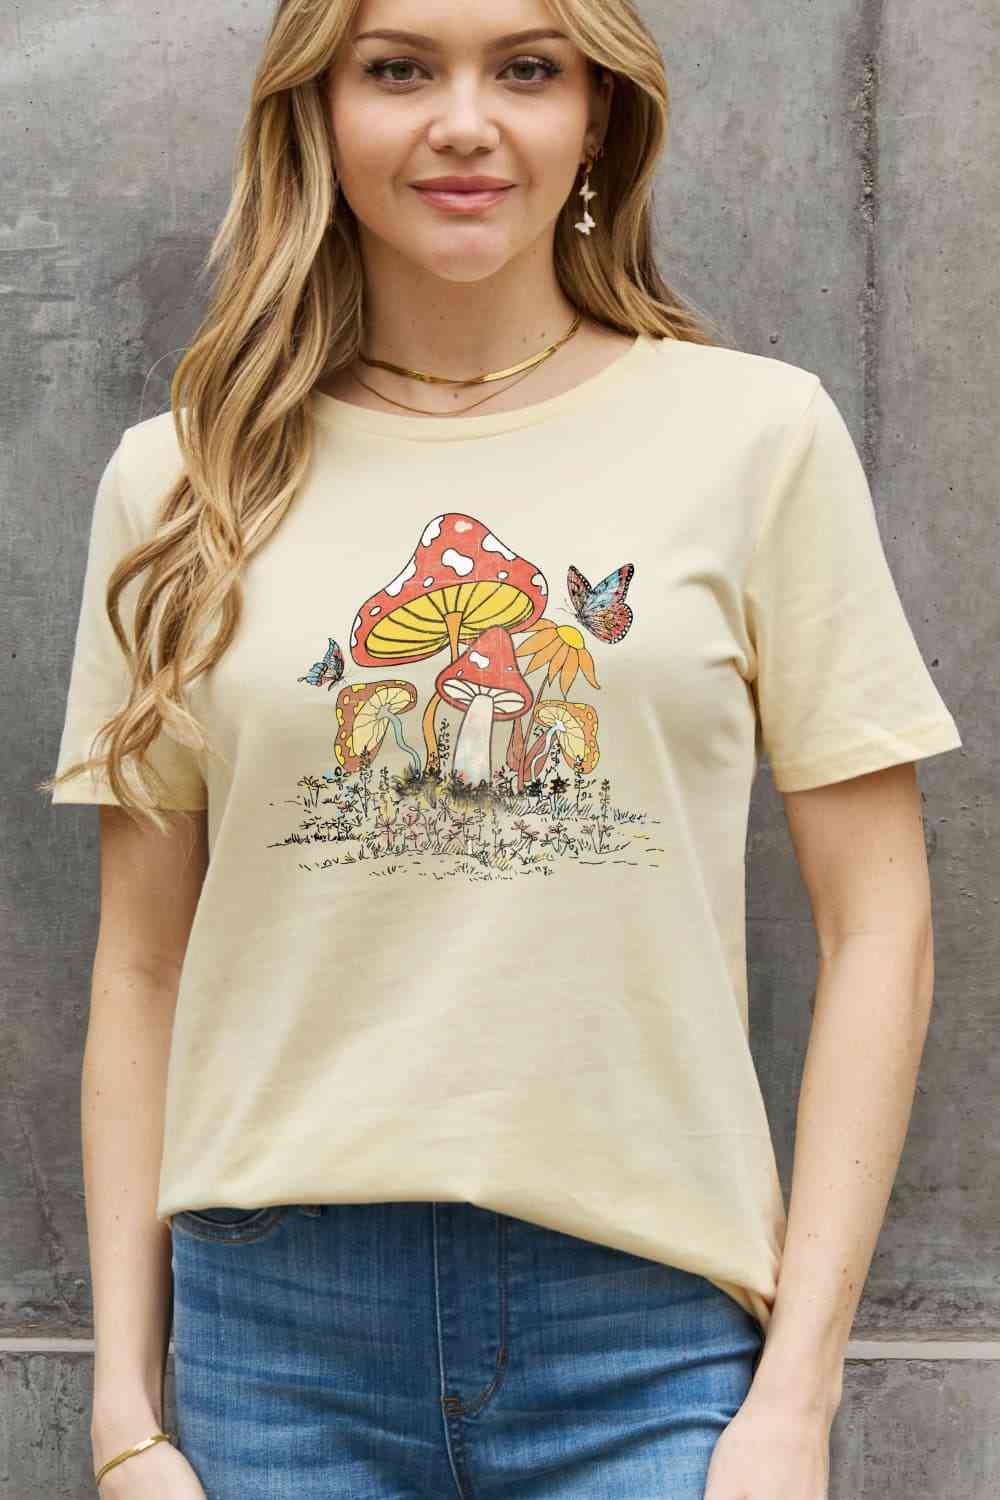 Mushroom & Butterfly Graphic Cotton T-Shirt - Ivory / S - T-Shirts - Shirts & Tops - 19 - 2024